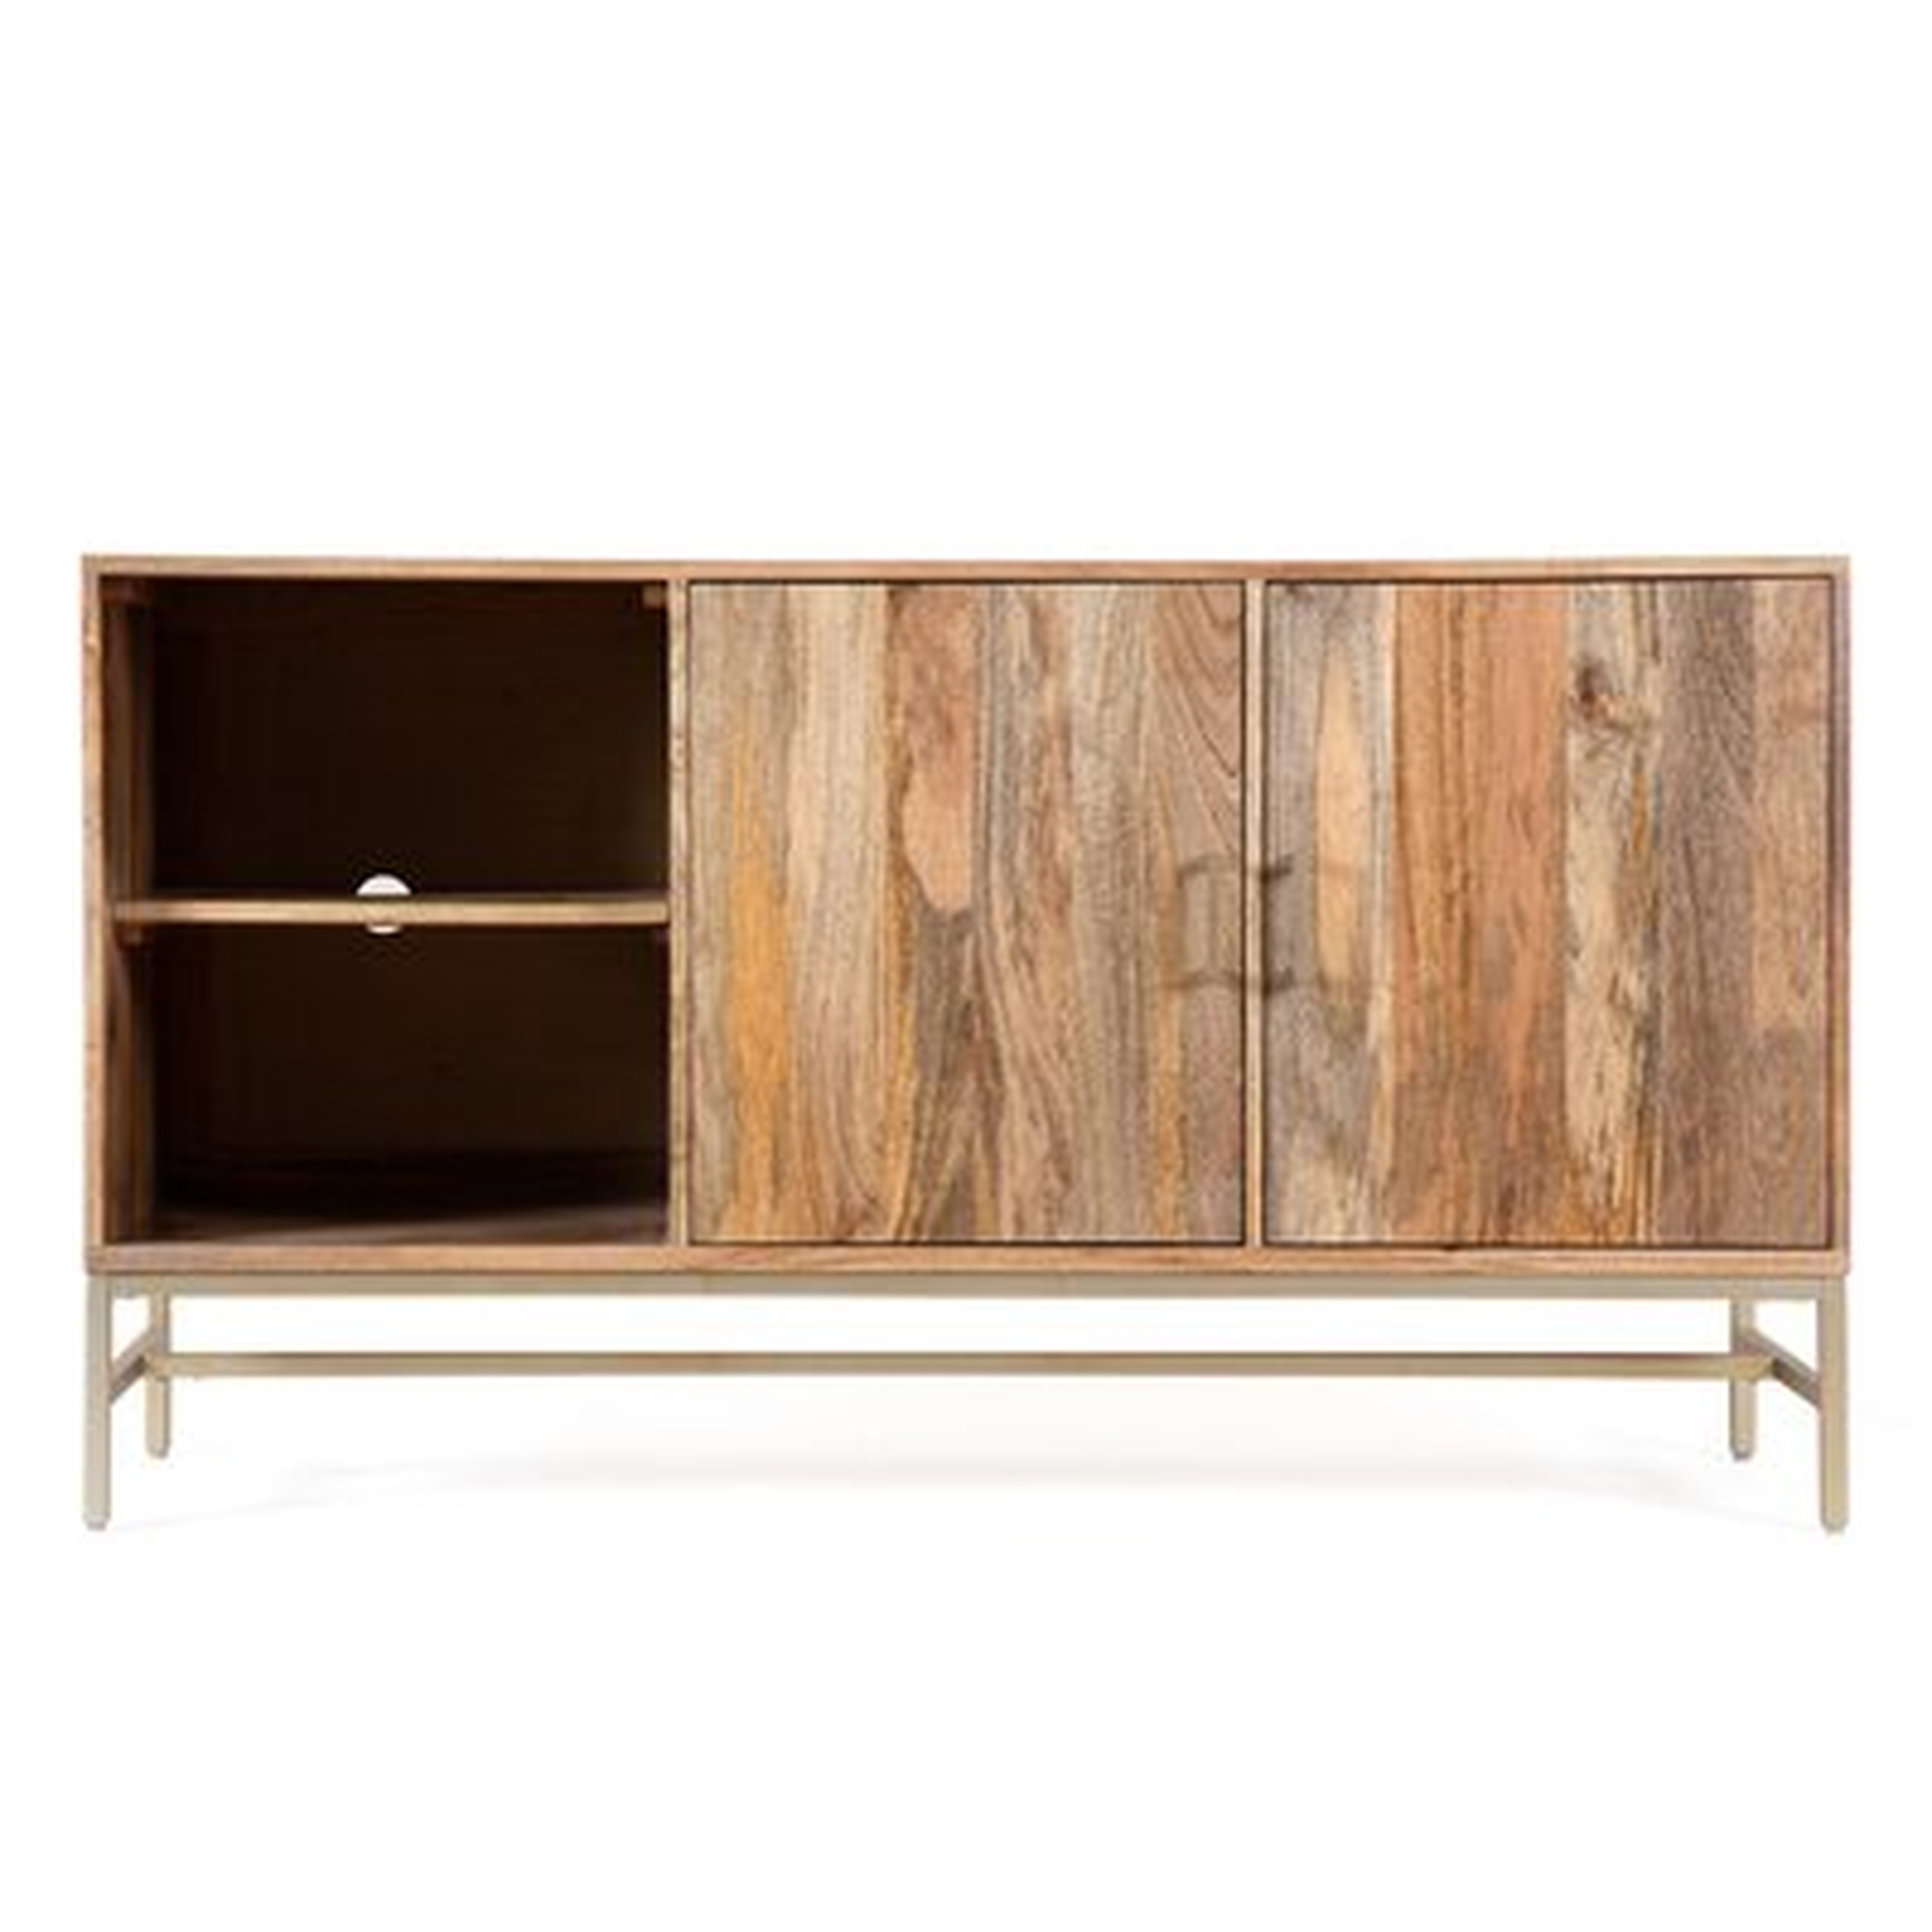 Anoka Solid Wood TV Stand for TVs up to 55 inches - AllModern